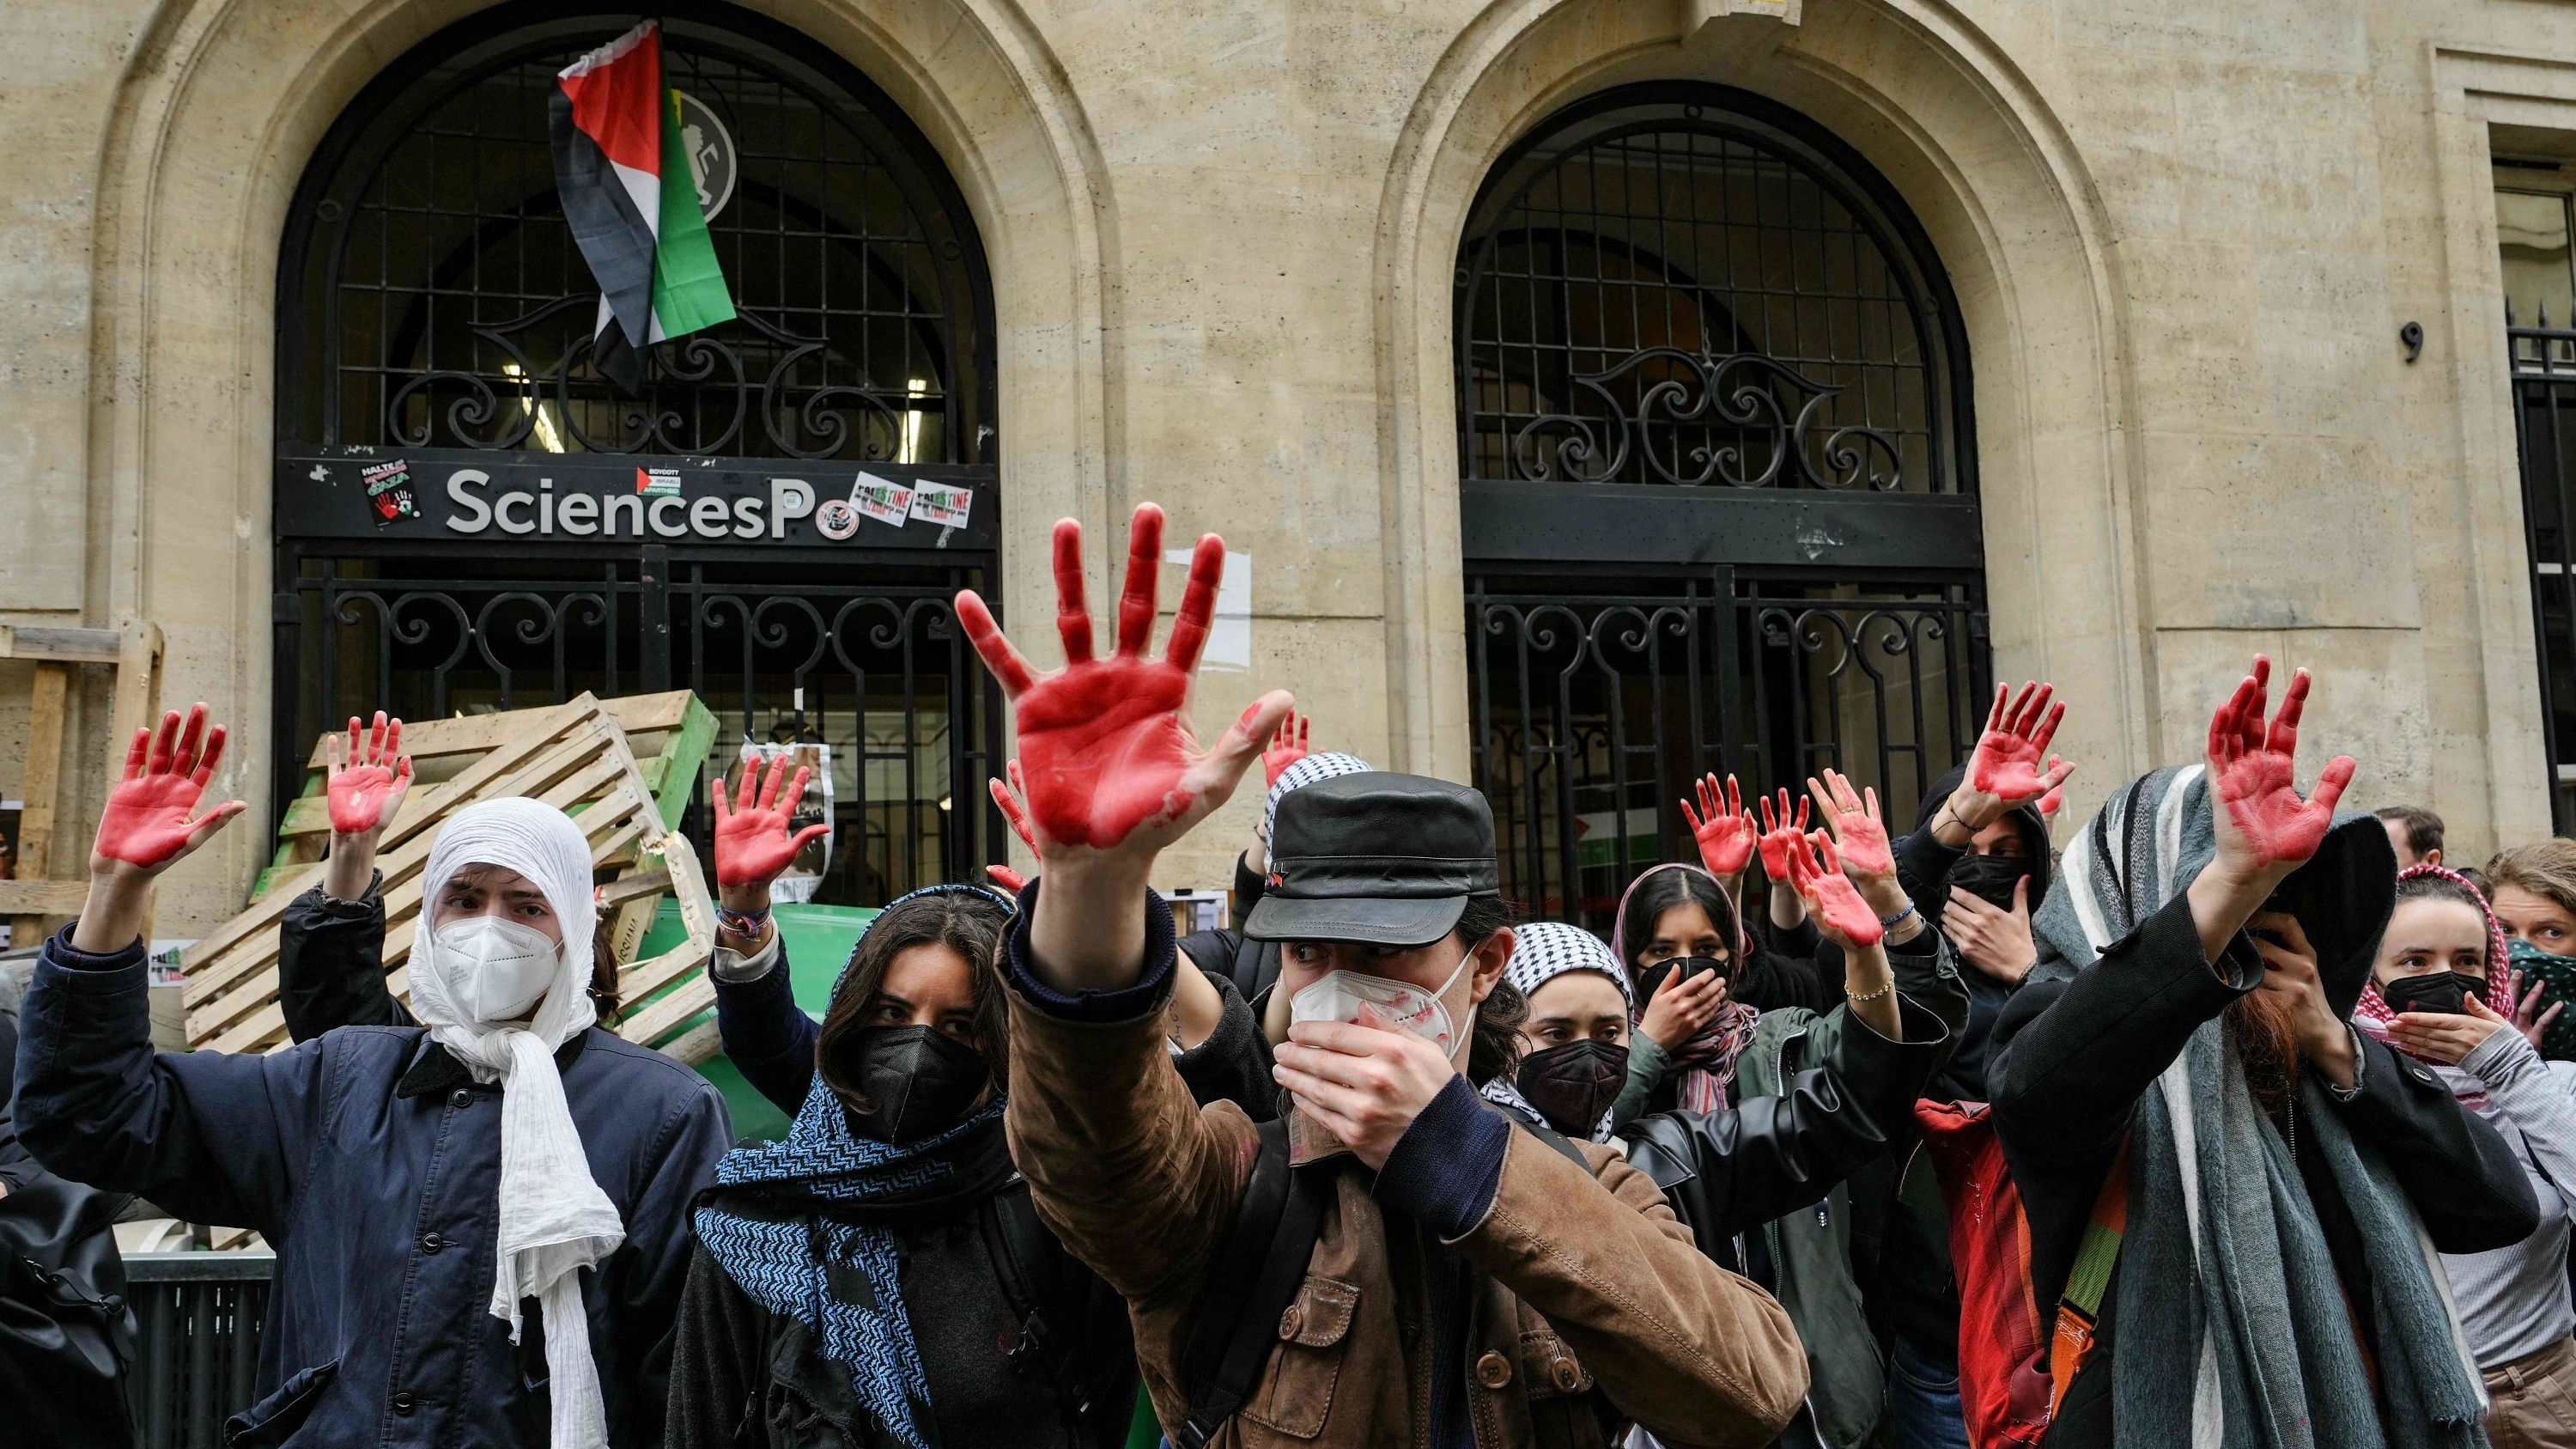 Pro-Palestinian demonstrations at Sciences Po: why the red hands symbol is controversial